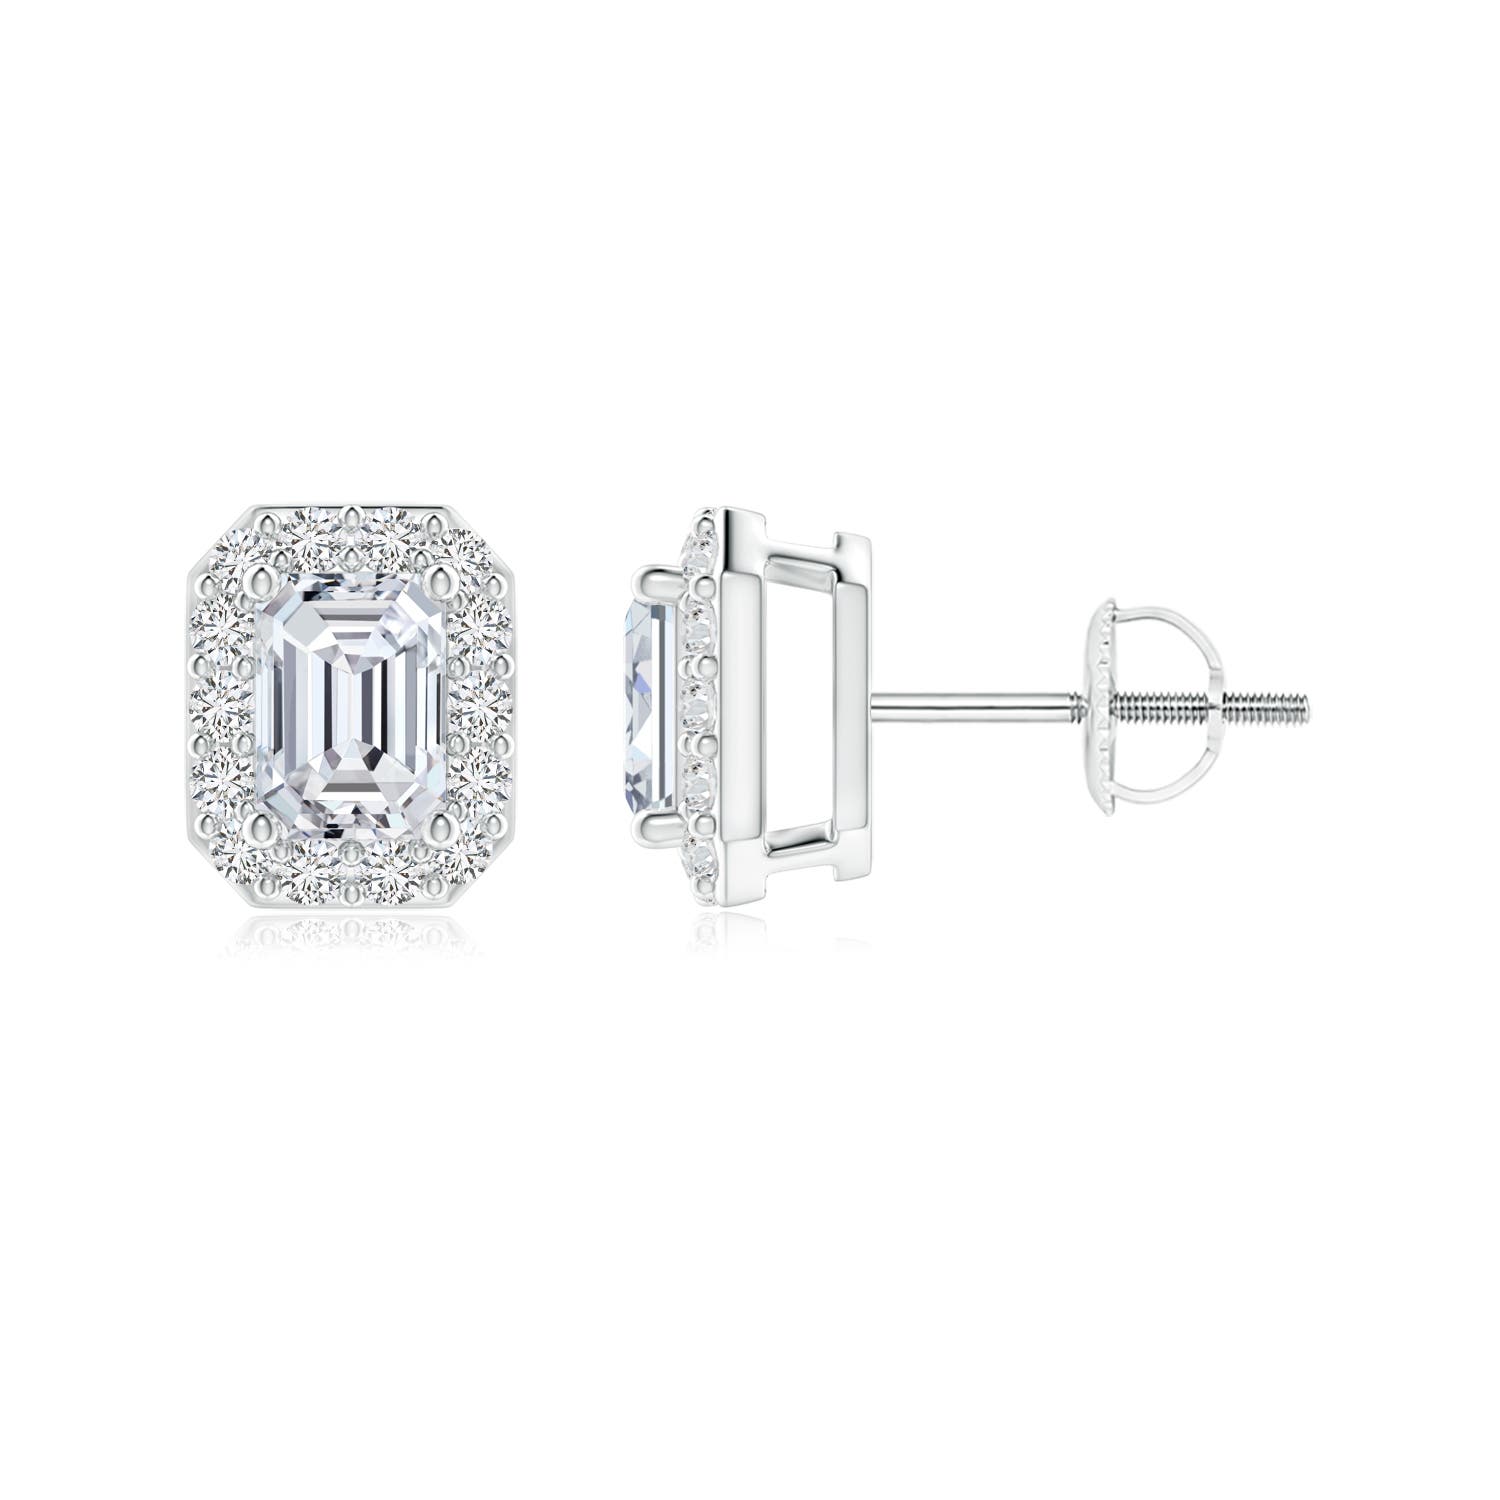 H, SI2 / 0.57 CT / 14 KT White Gold